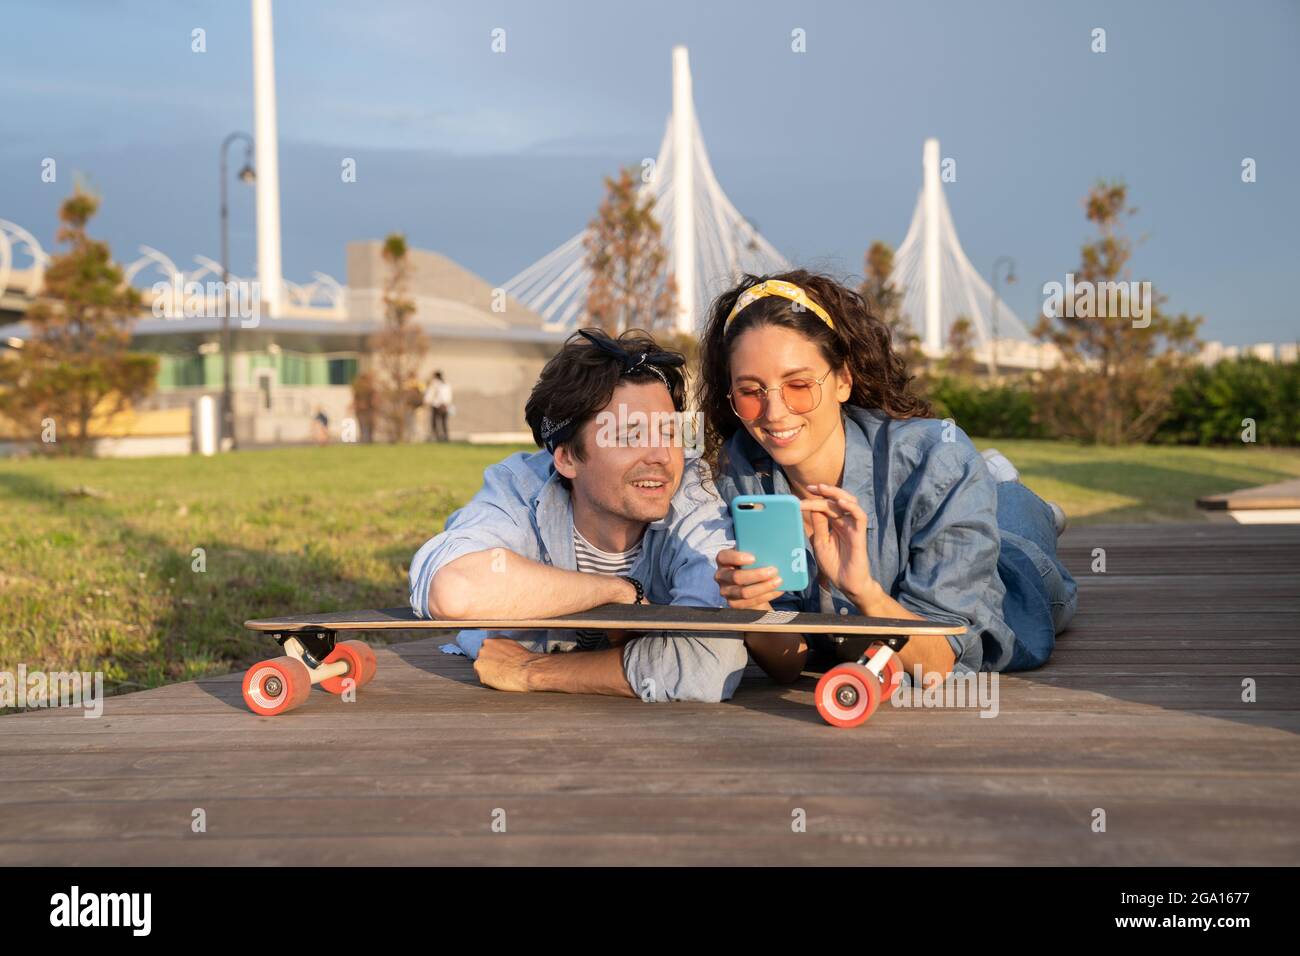 Young stylish girl show guy text message on smartphone lying on longboard in urban park outdoors Stock Photo